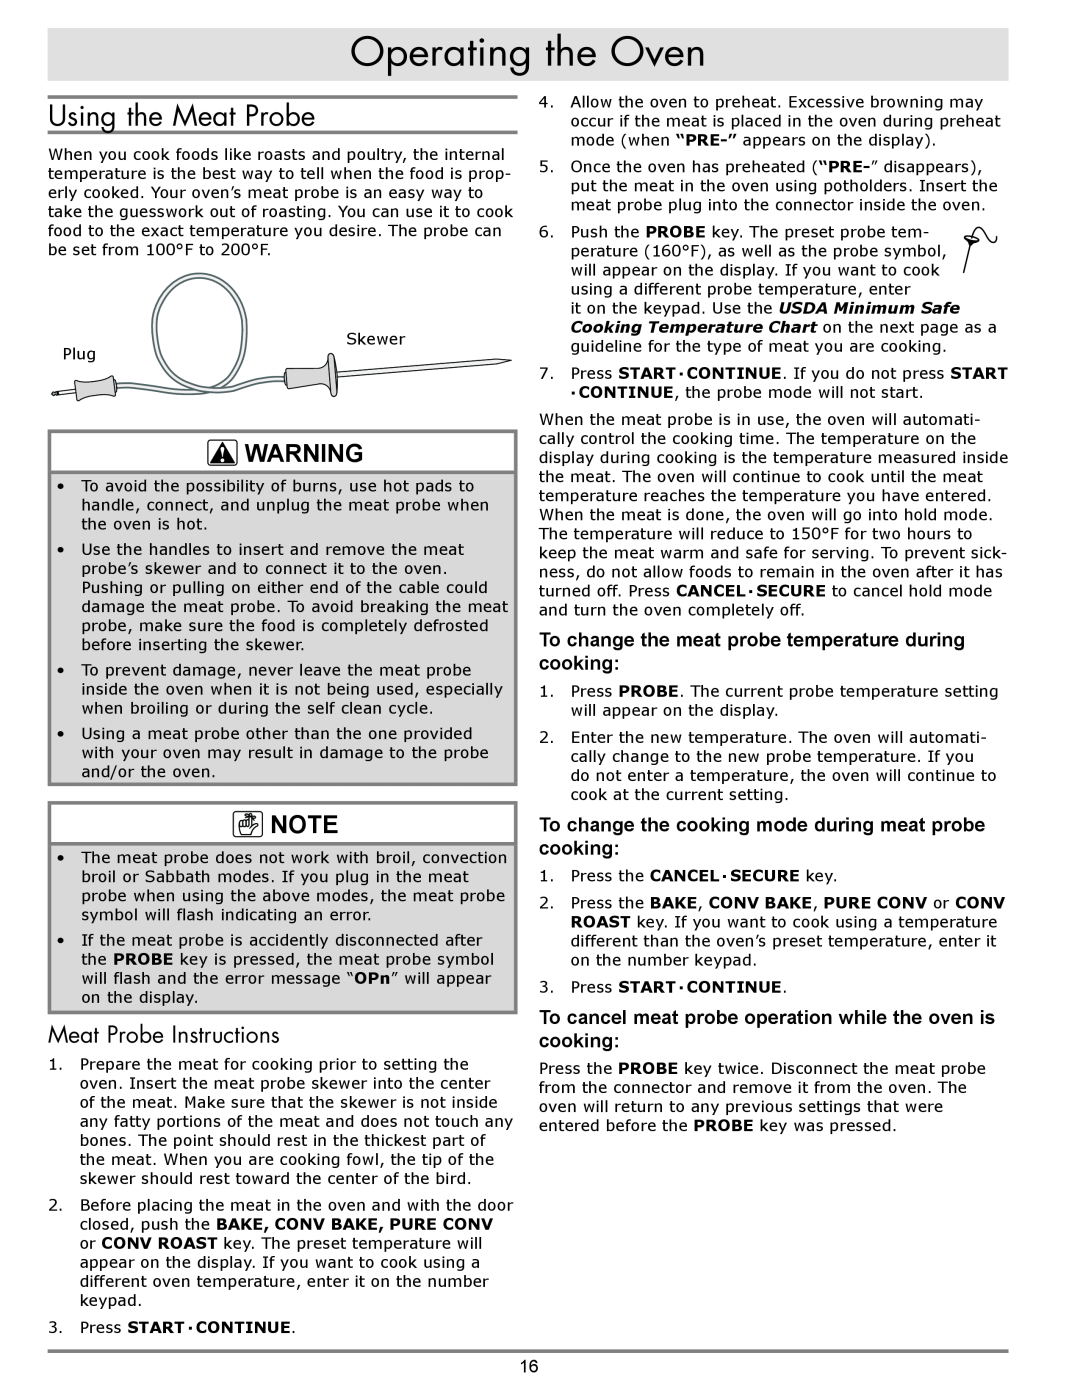 Dacor dacor important safety instructions Using the Meat Probe, Meat Probe Instructions, Operating the Oven 